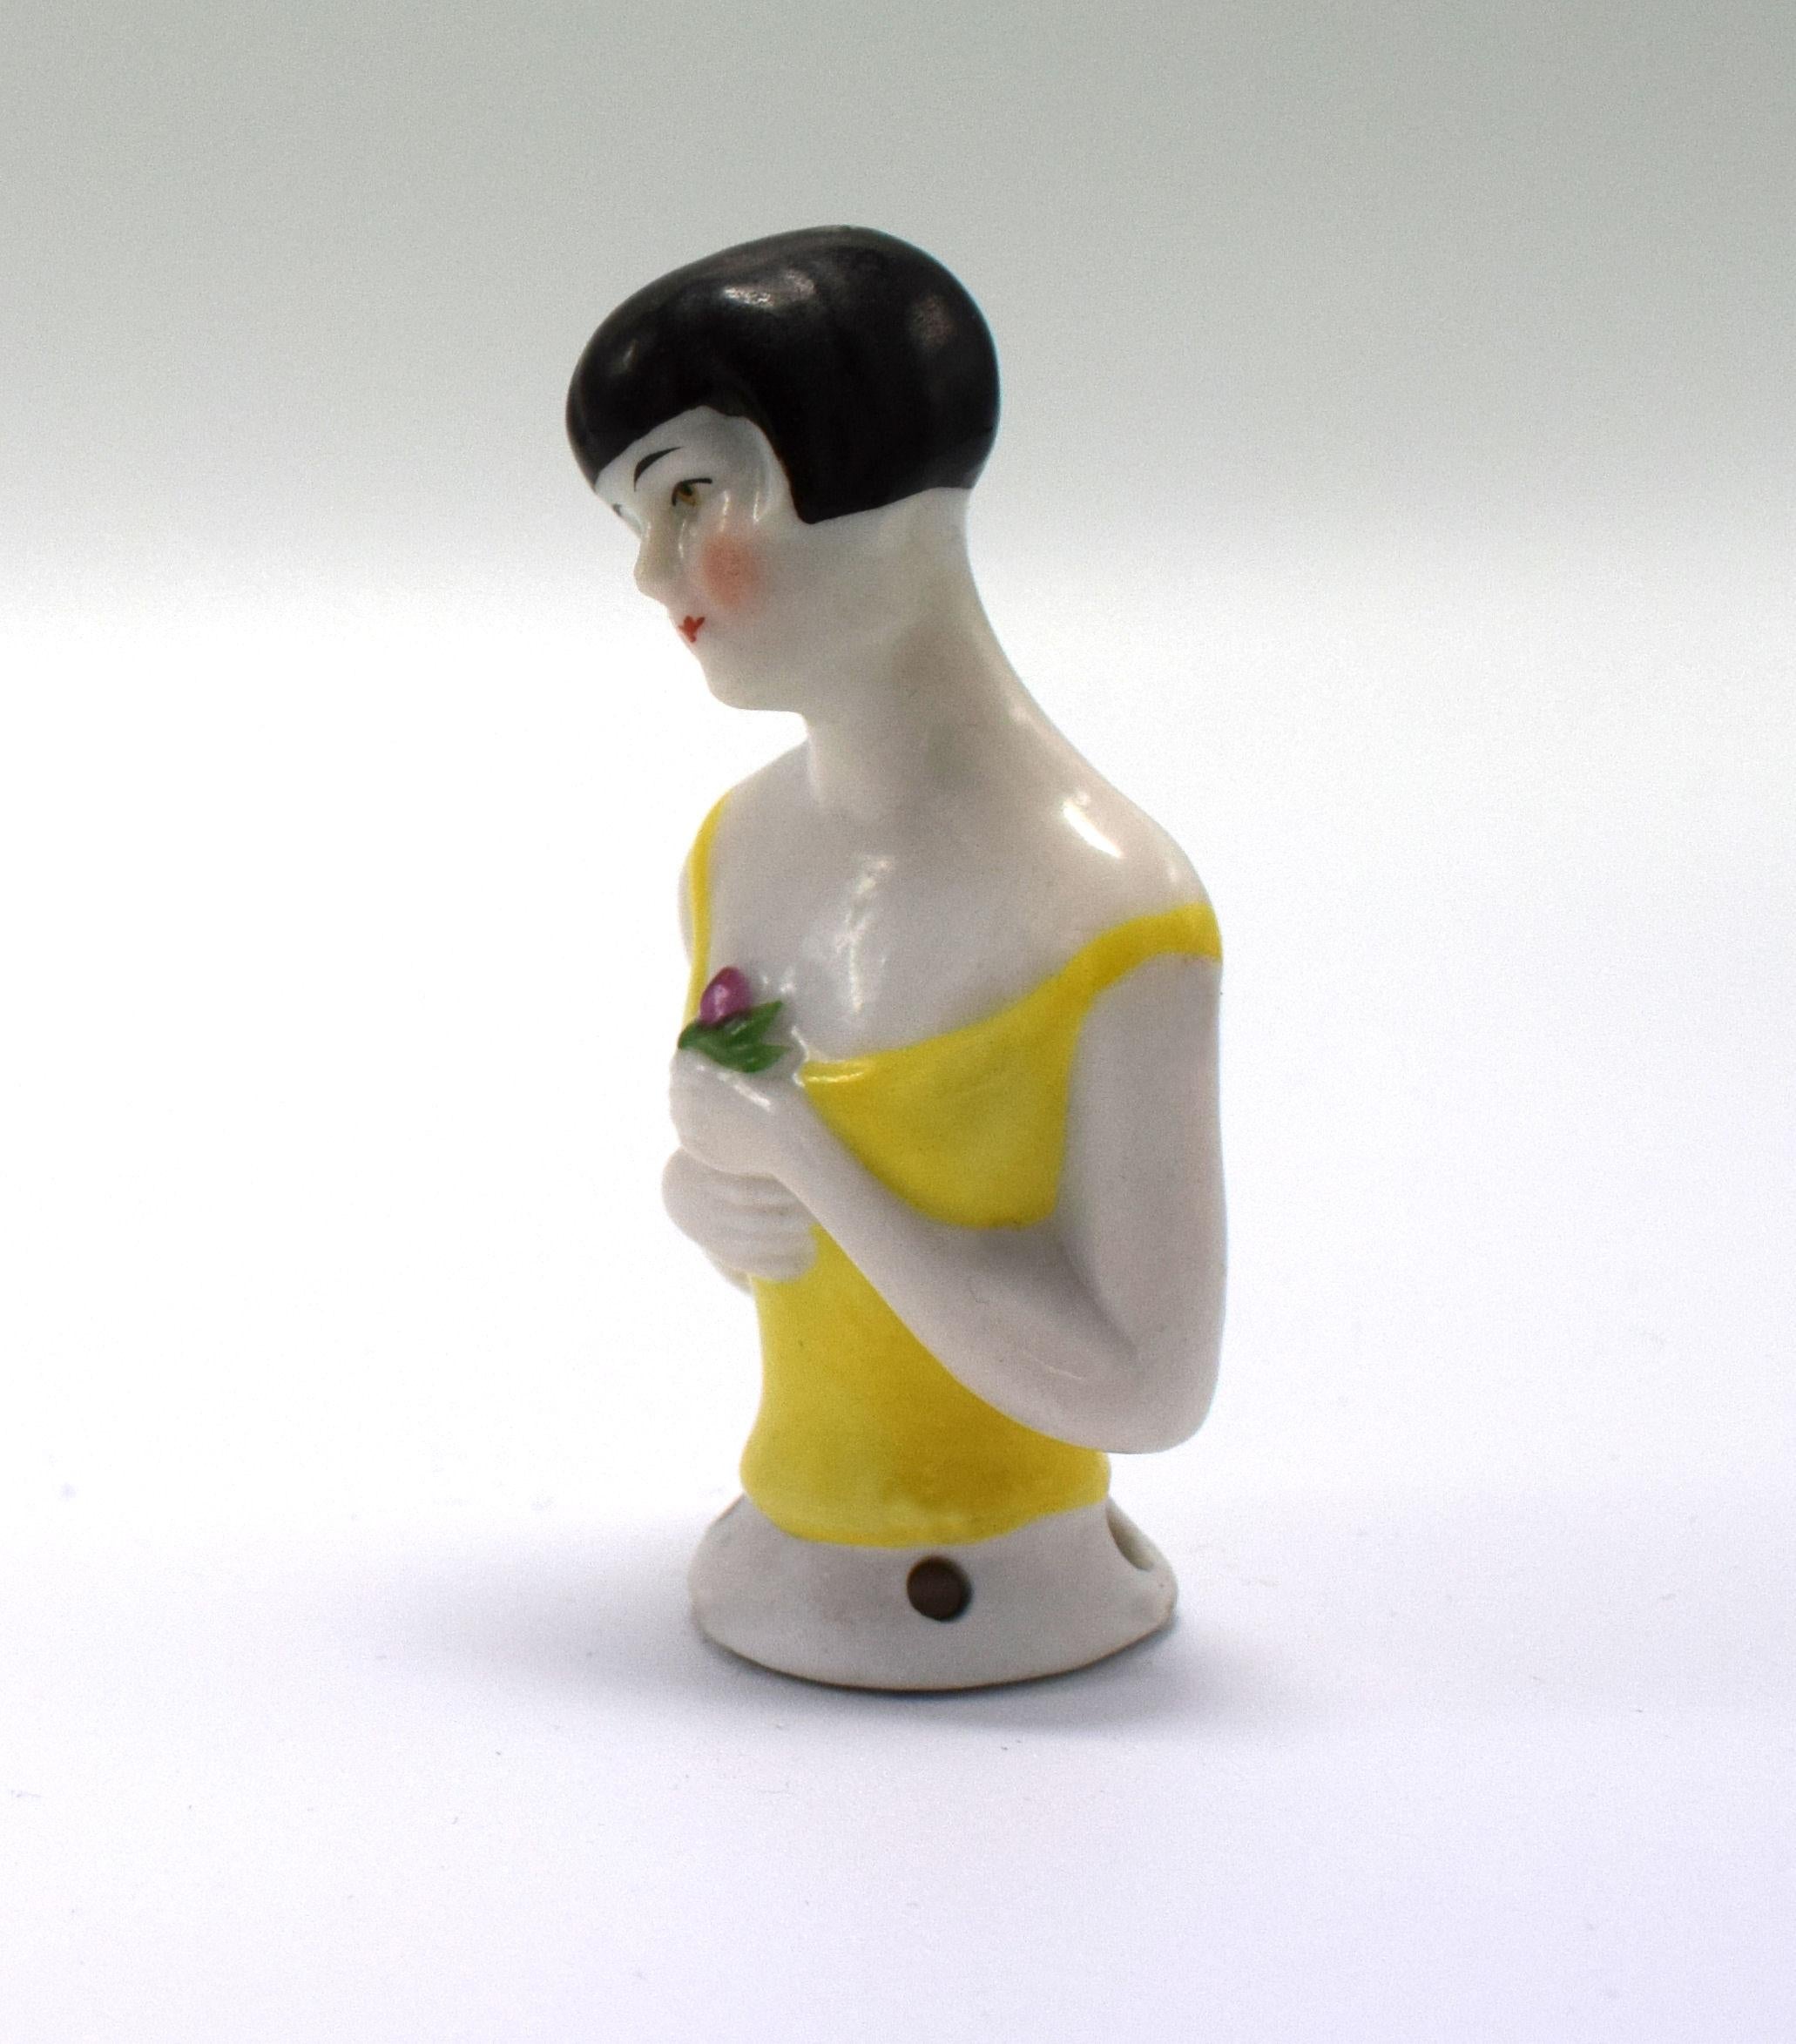 On offer and for your consideration is this charming and totally authentic late 1920s Art Deco German porcelain pin cushion half doll in the form of a pretty flapper girl with a black bob hair cut. She's wearing a daffodil yellow shoestring top with